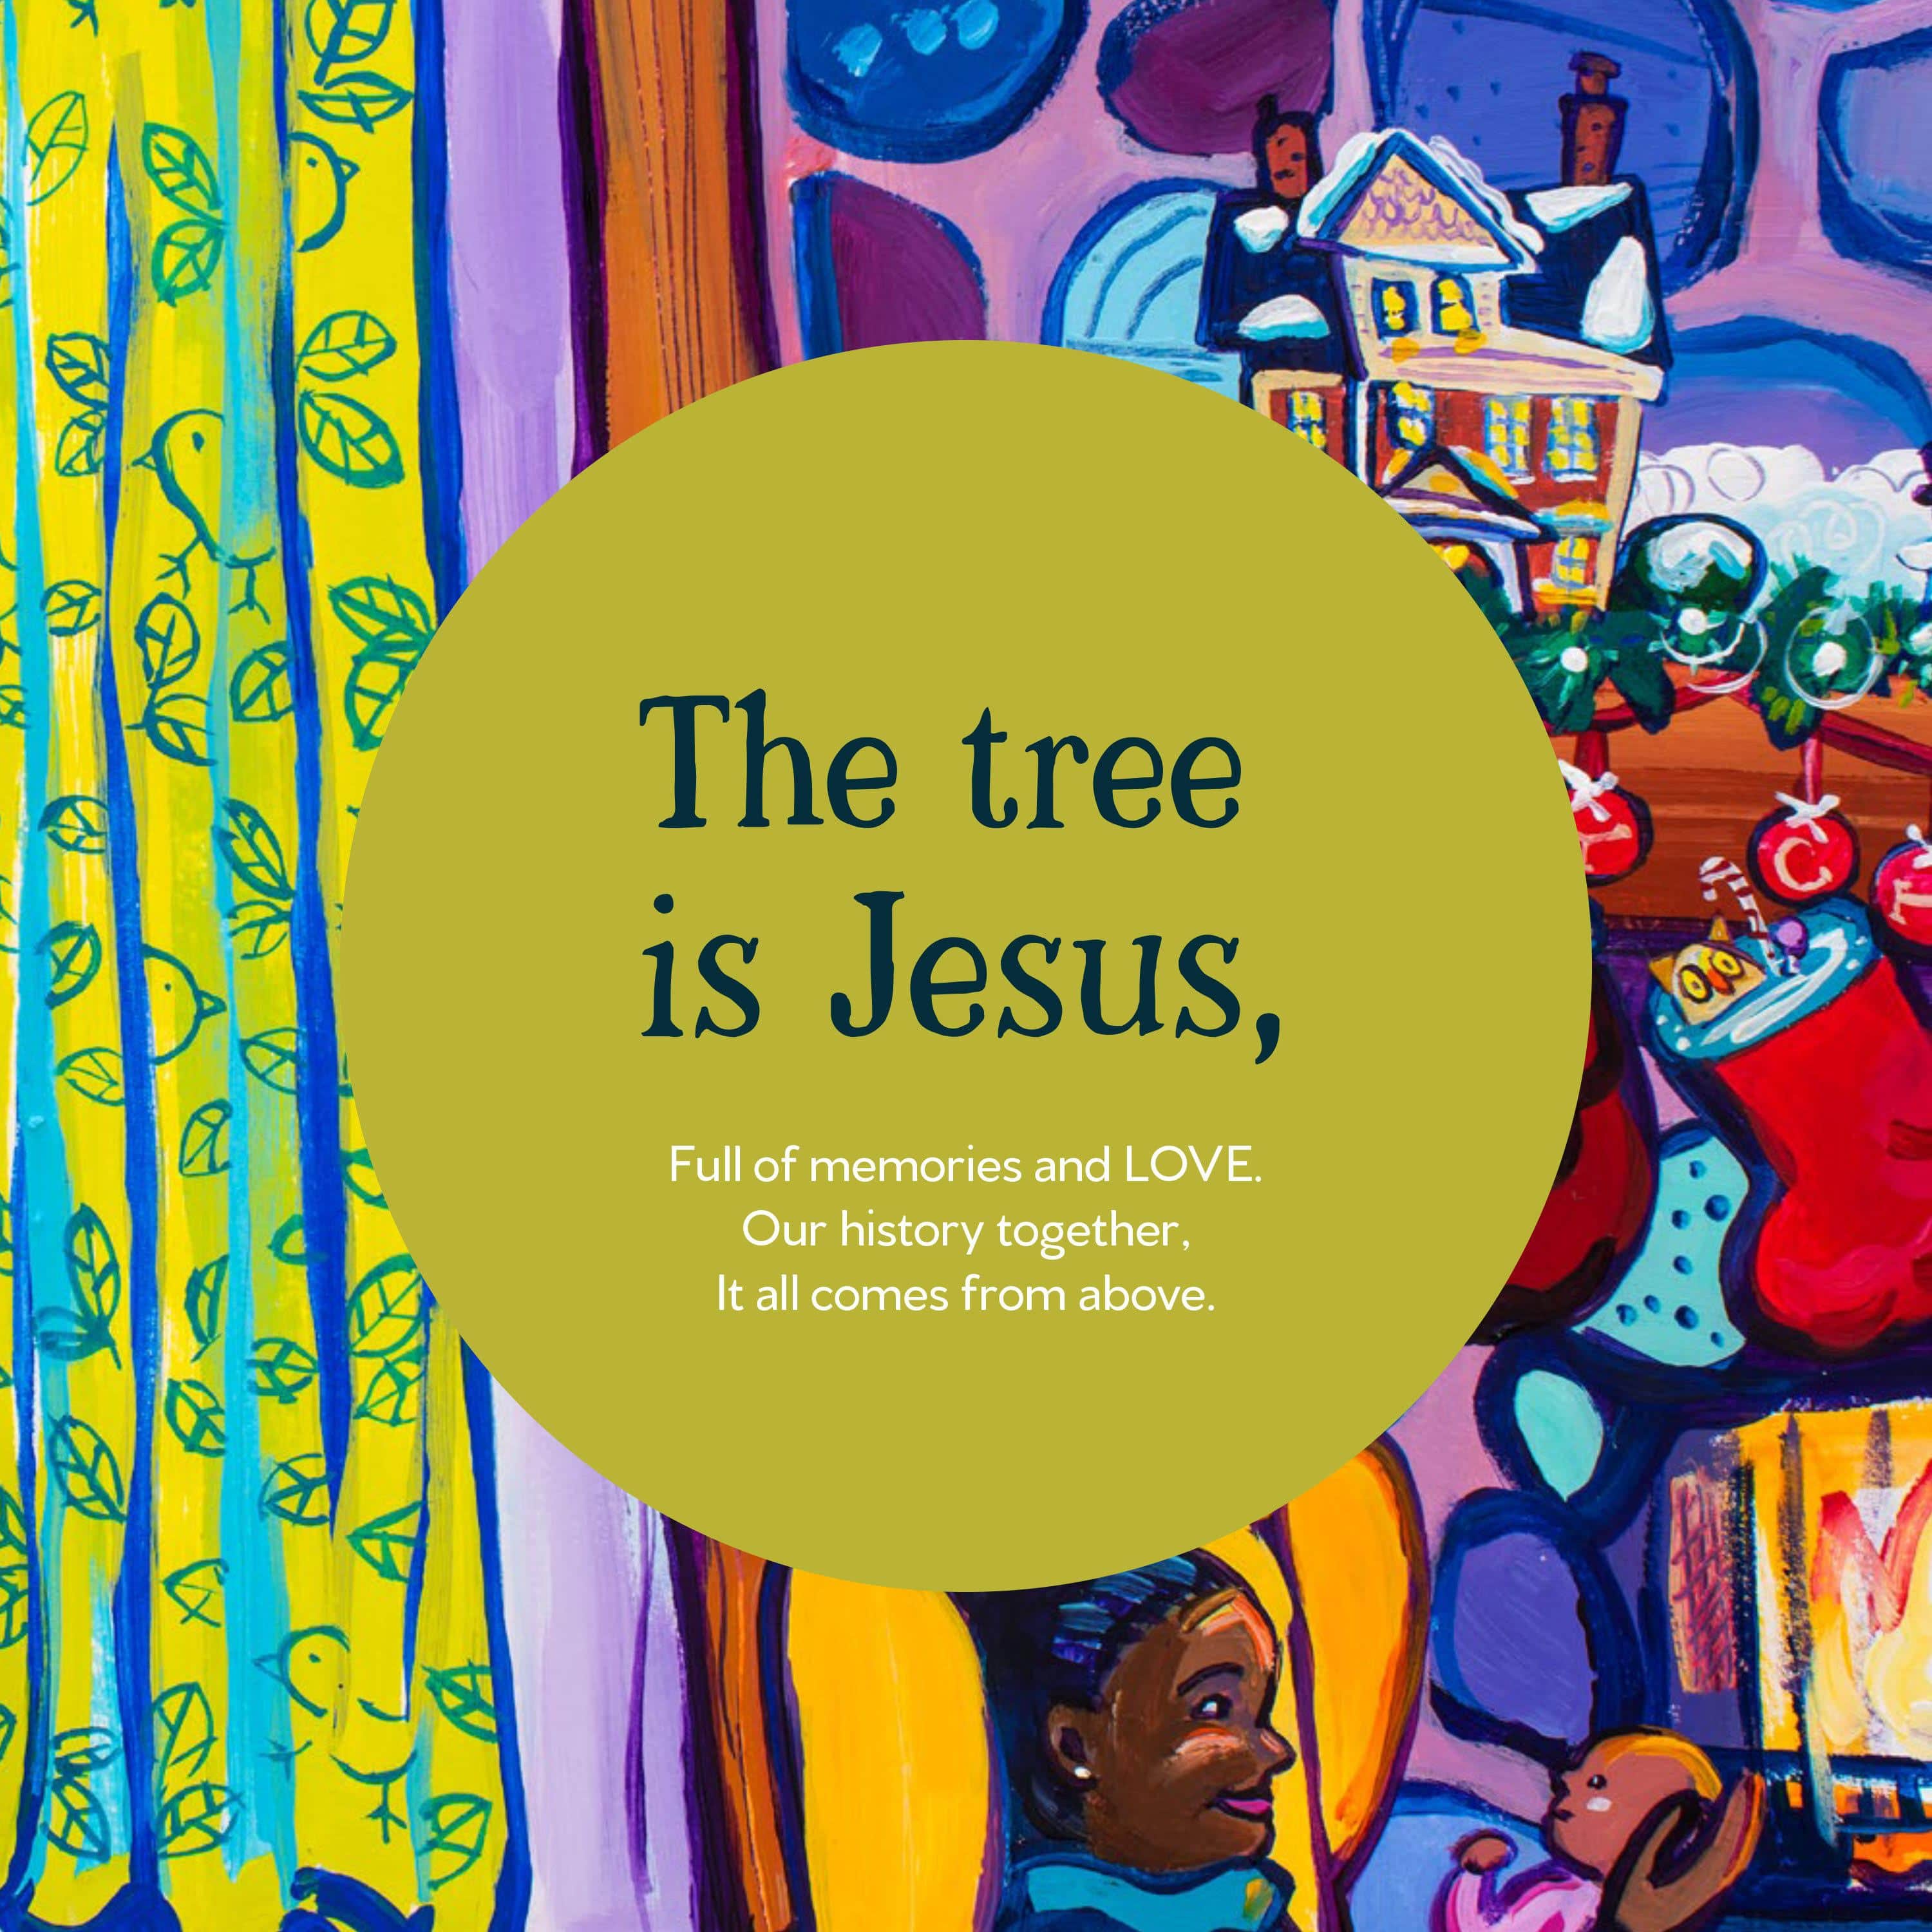 Image from inside of inspirational picture book SEEING Christmas - by Karen Stacy illustrated by Joel-Schoon Tanis -  Little Bird Press Online- image reads "The tree is Jesus, full of memories and LOVE. Our history together, it all comes from above."